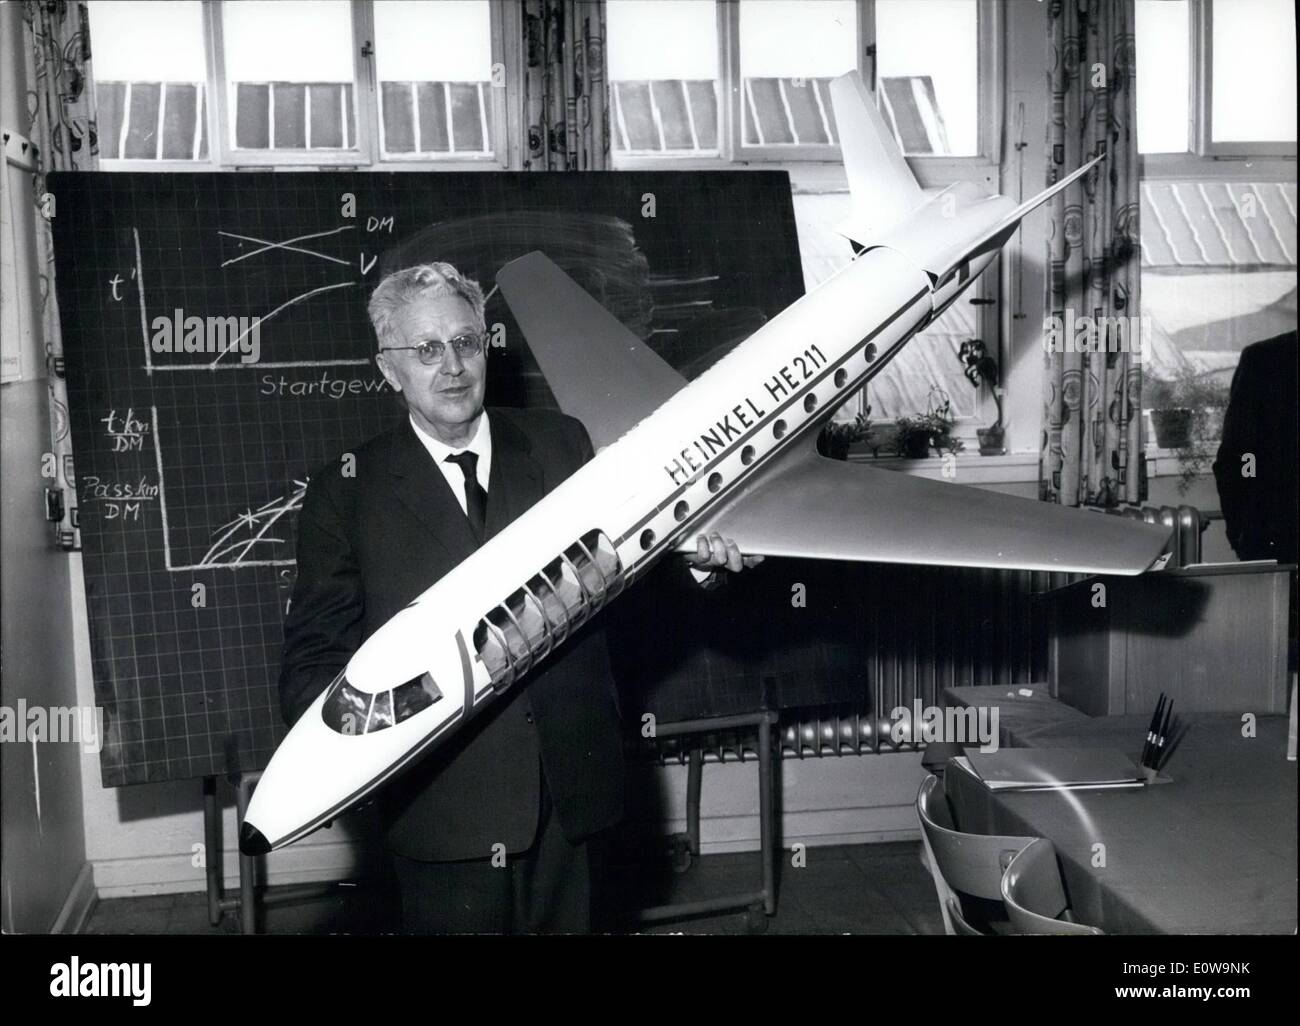 Mar. 03, 1962 - Heinkel presents model of new jetliner: The Heinkel Aircraft Company of Speyer West-Germany , presented a model Stock Photo